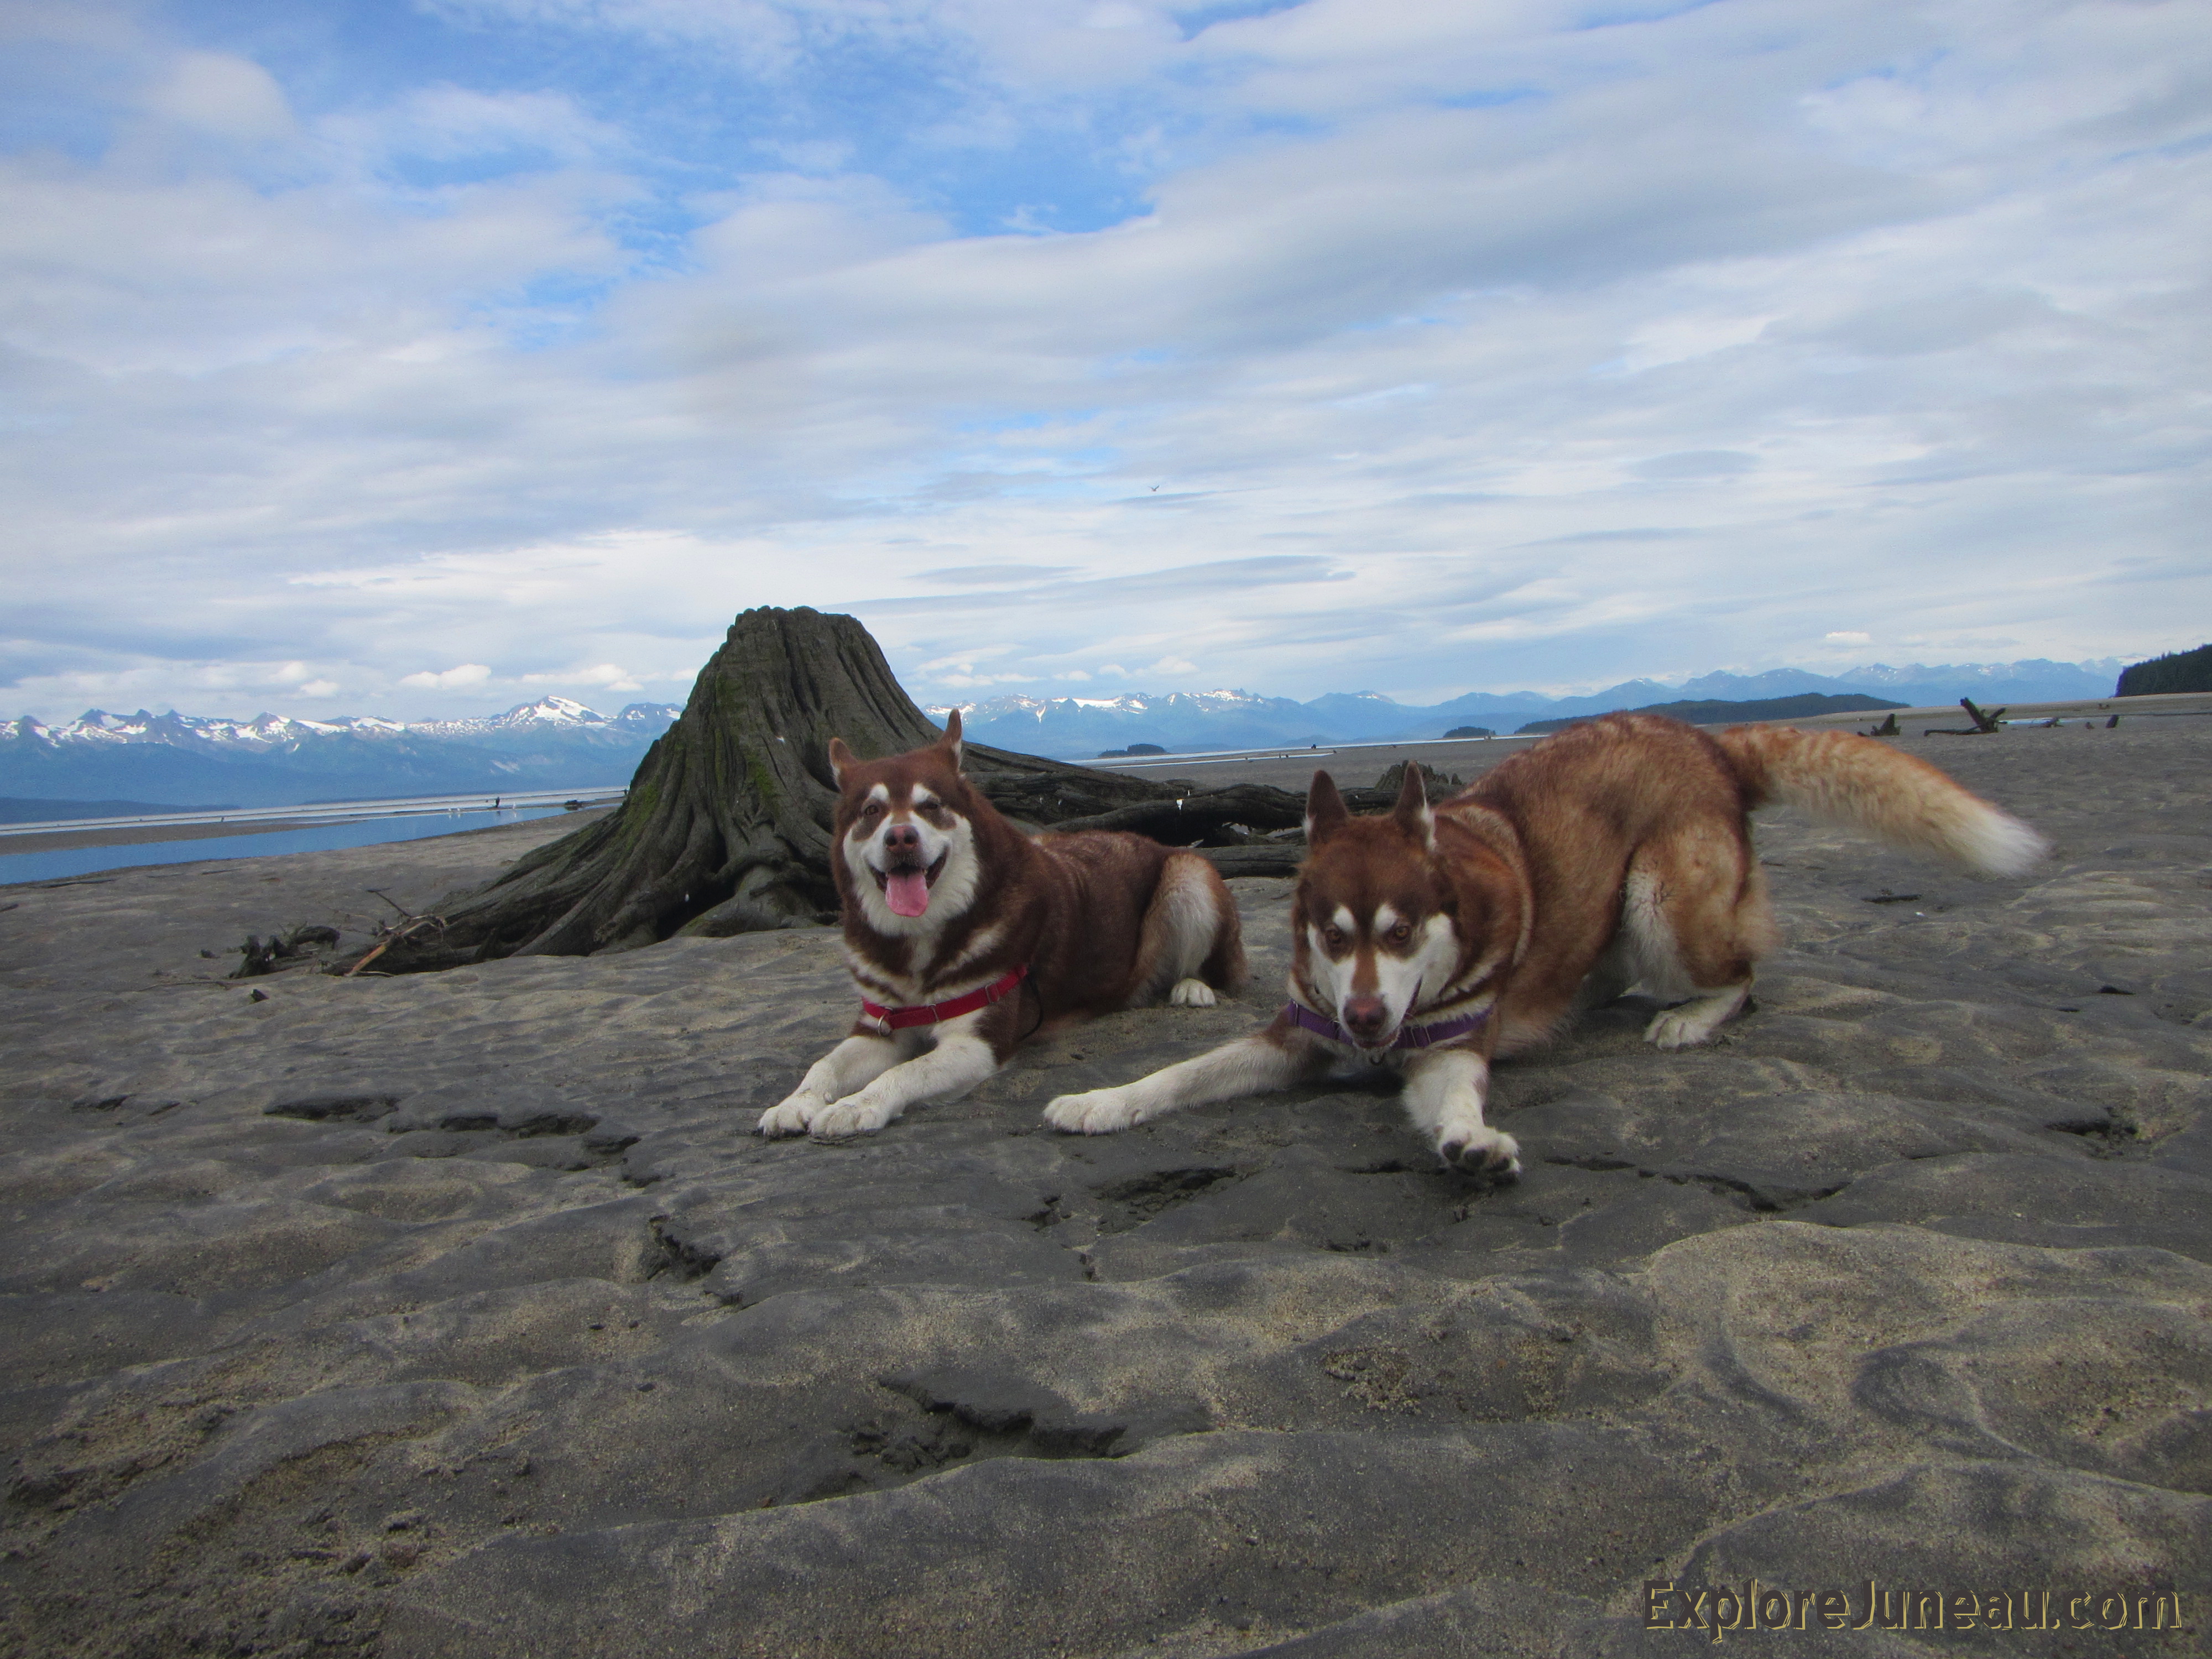 We All Have That One Special Friend, or Two. Skadi & Freya with Russell Josh Peterson ~ Eagle Beach Juneau Alaska Thank you for your Kindness and Support.